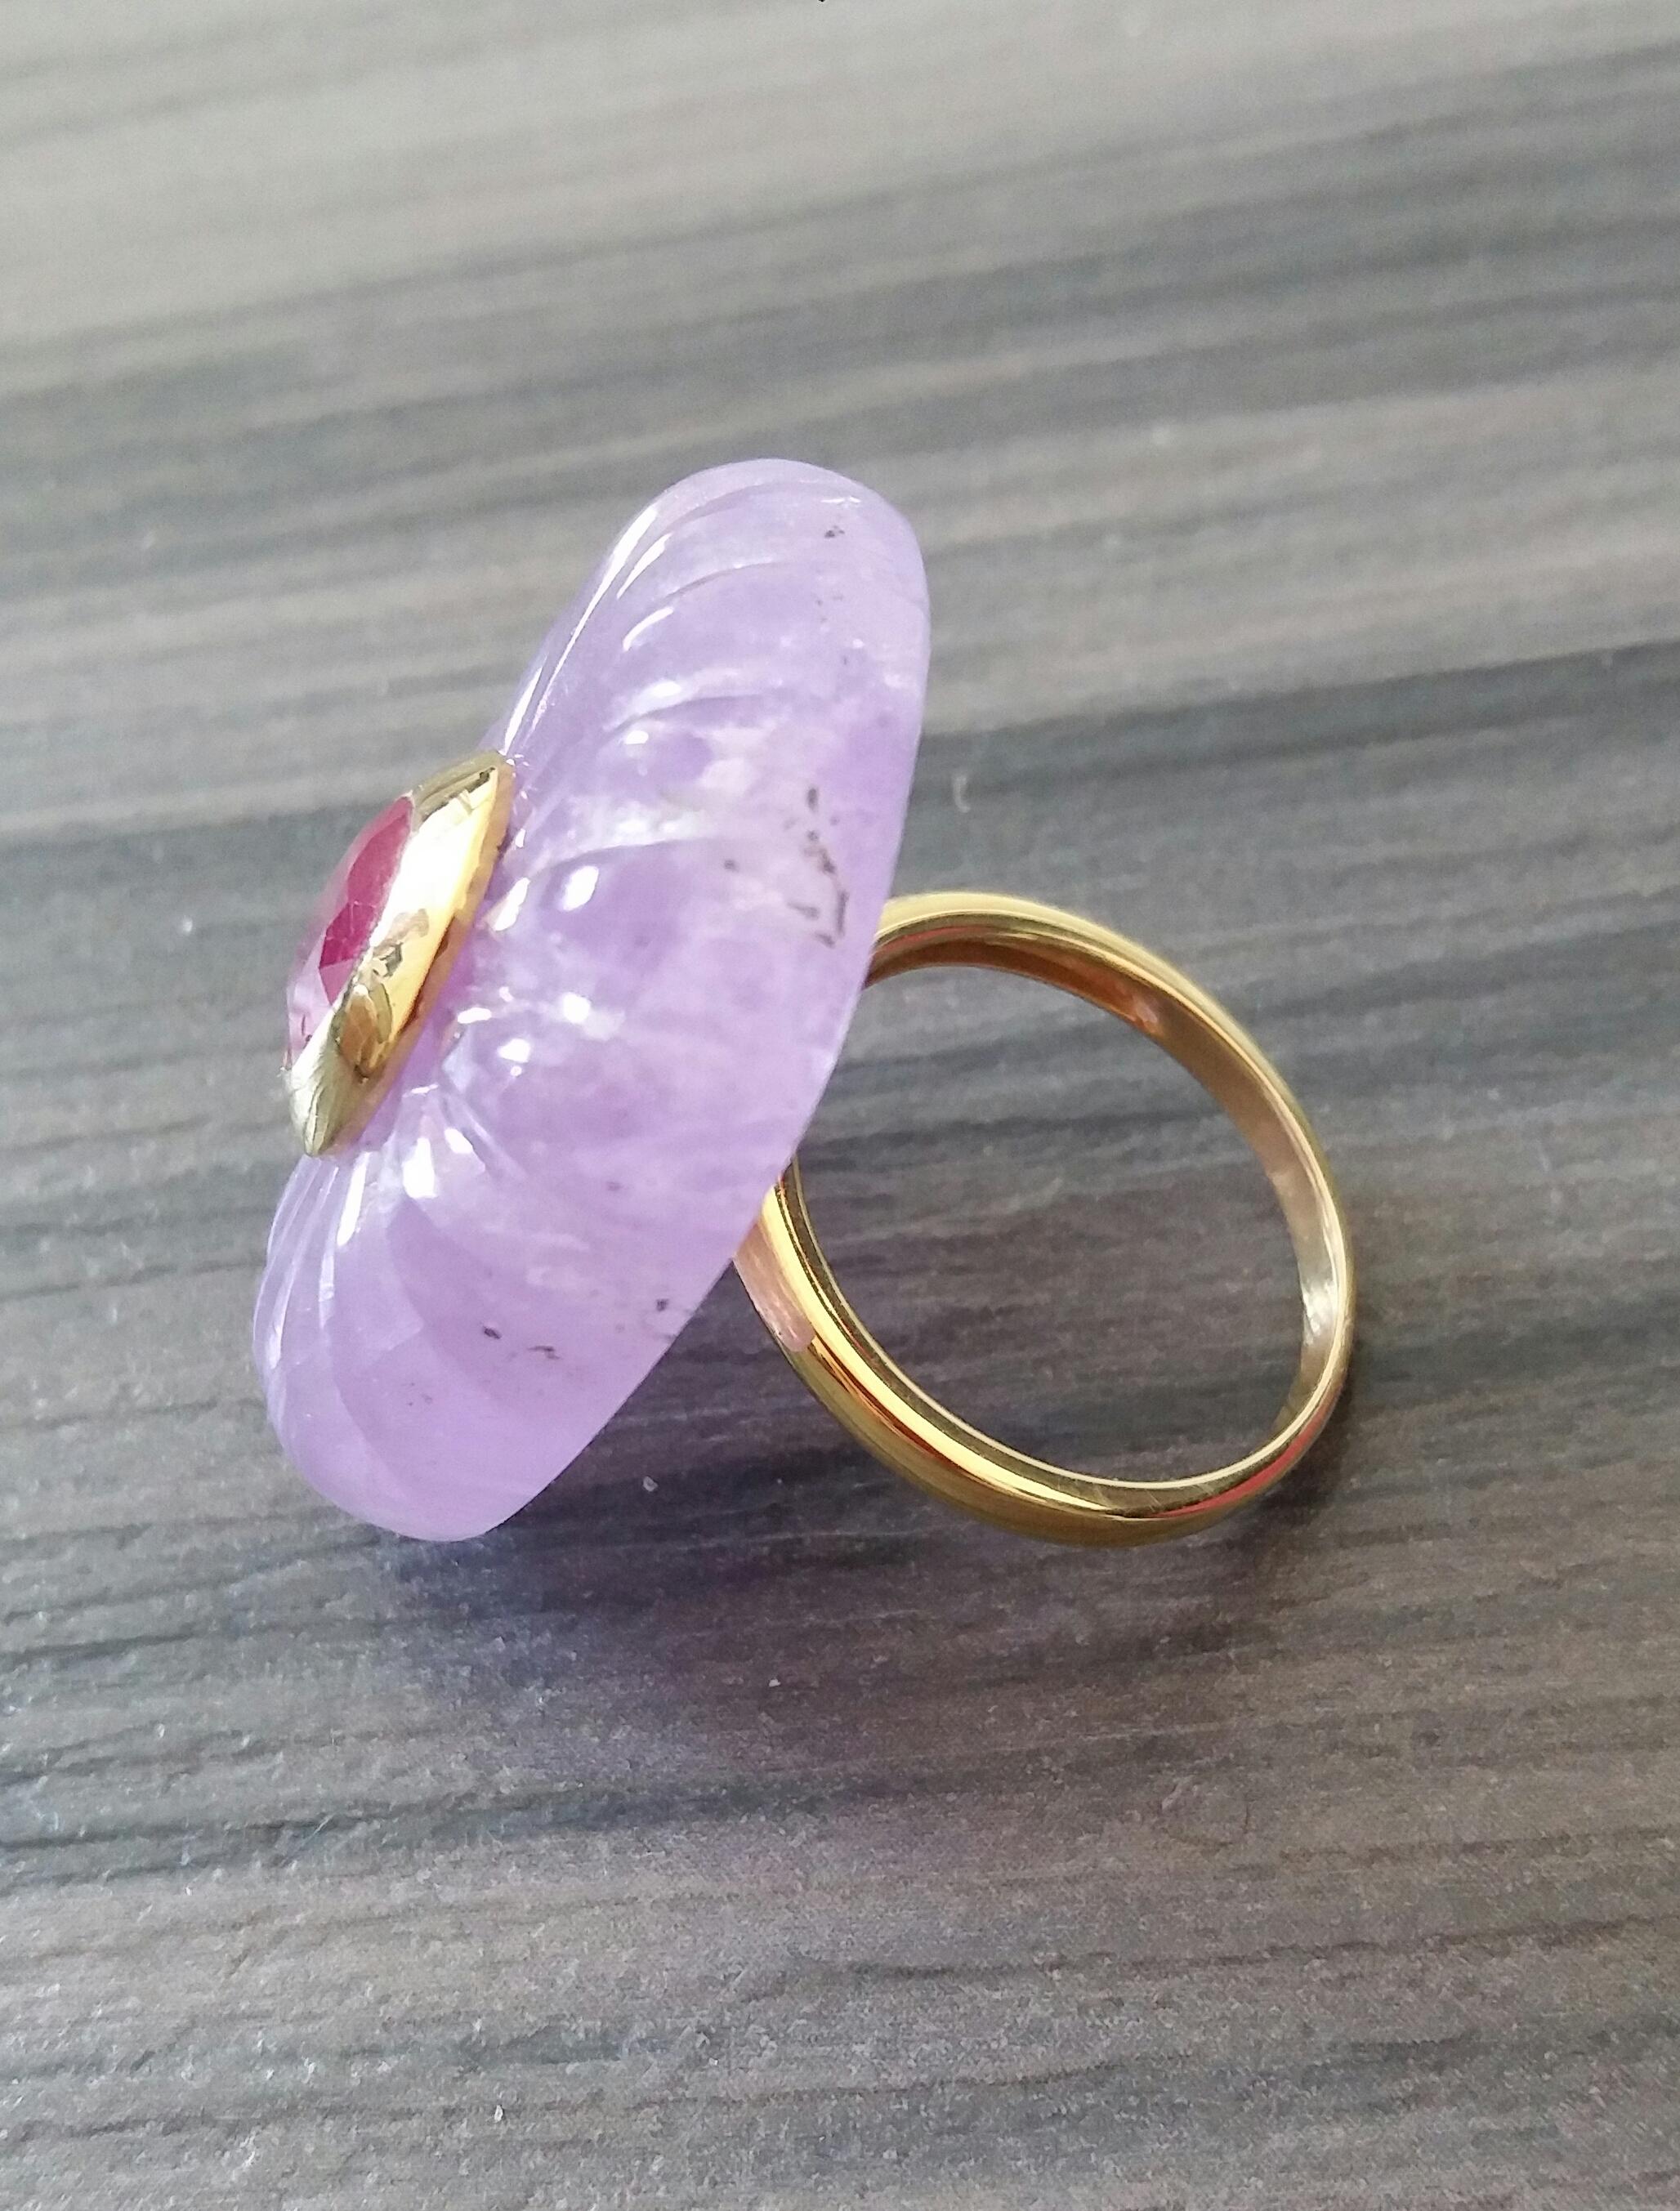 Unique ring with a Big Natural Engraved Cushion Shape Amethyst ,measuring 32 mm. x 24 mm x 8mm. and weighing 63 Carats with a nice Oval Faceted Ruby measuring 7 mm x 9 mm set in 14 kt yellow gold in the middle...Ring shank is also in 14 kt  solid